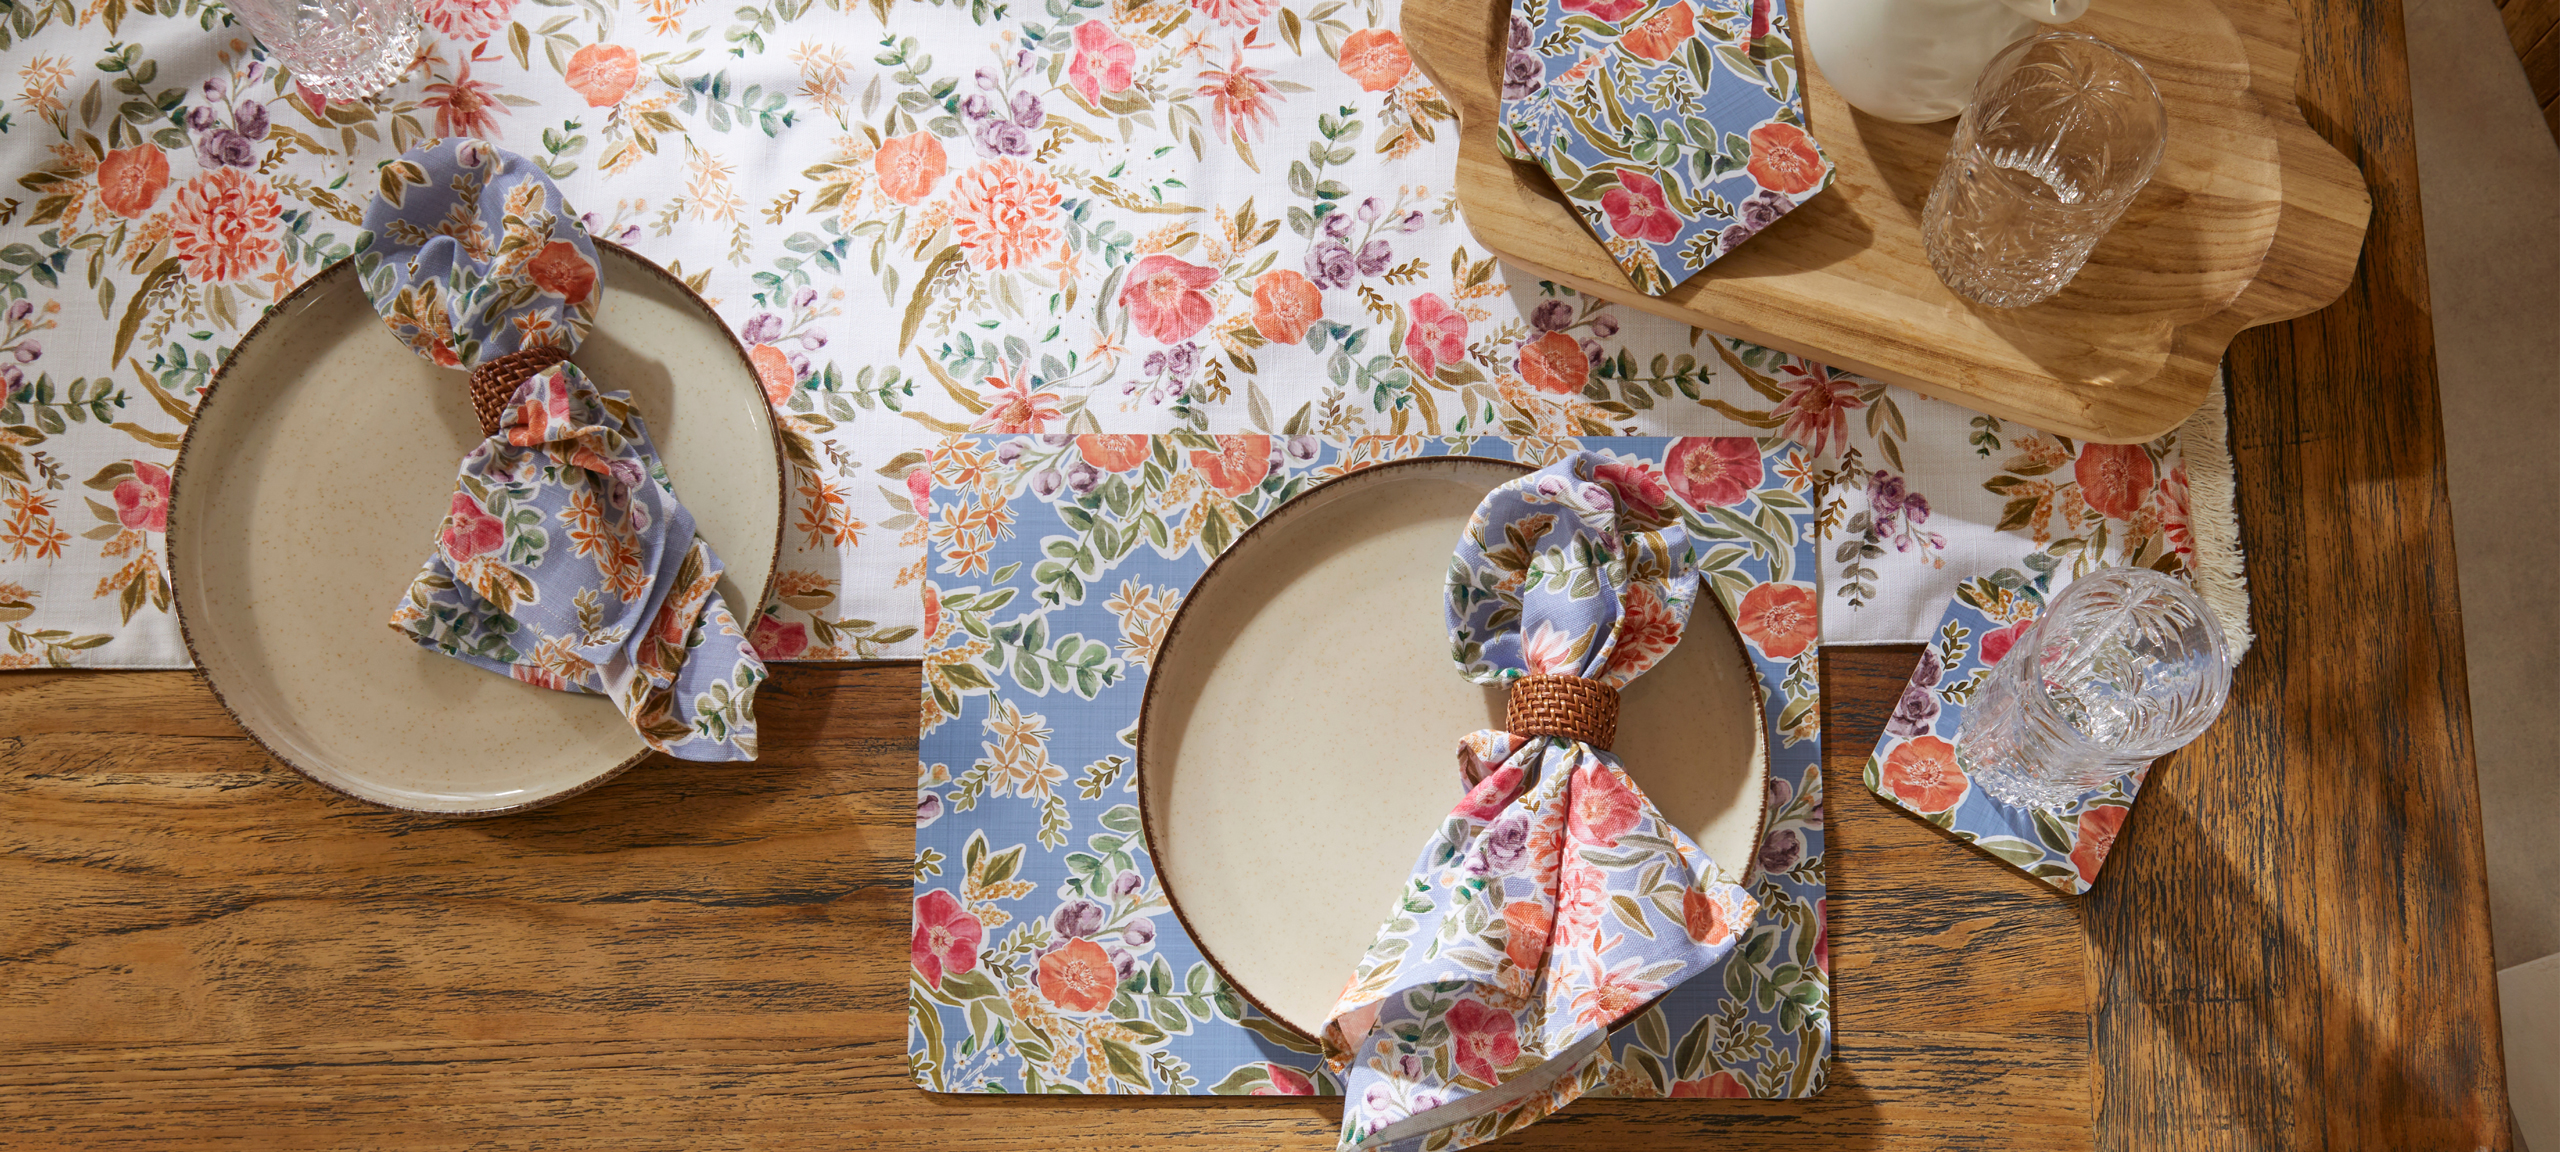 Pillow Talk Easter dining table styling